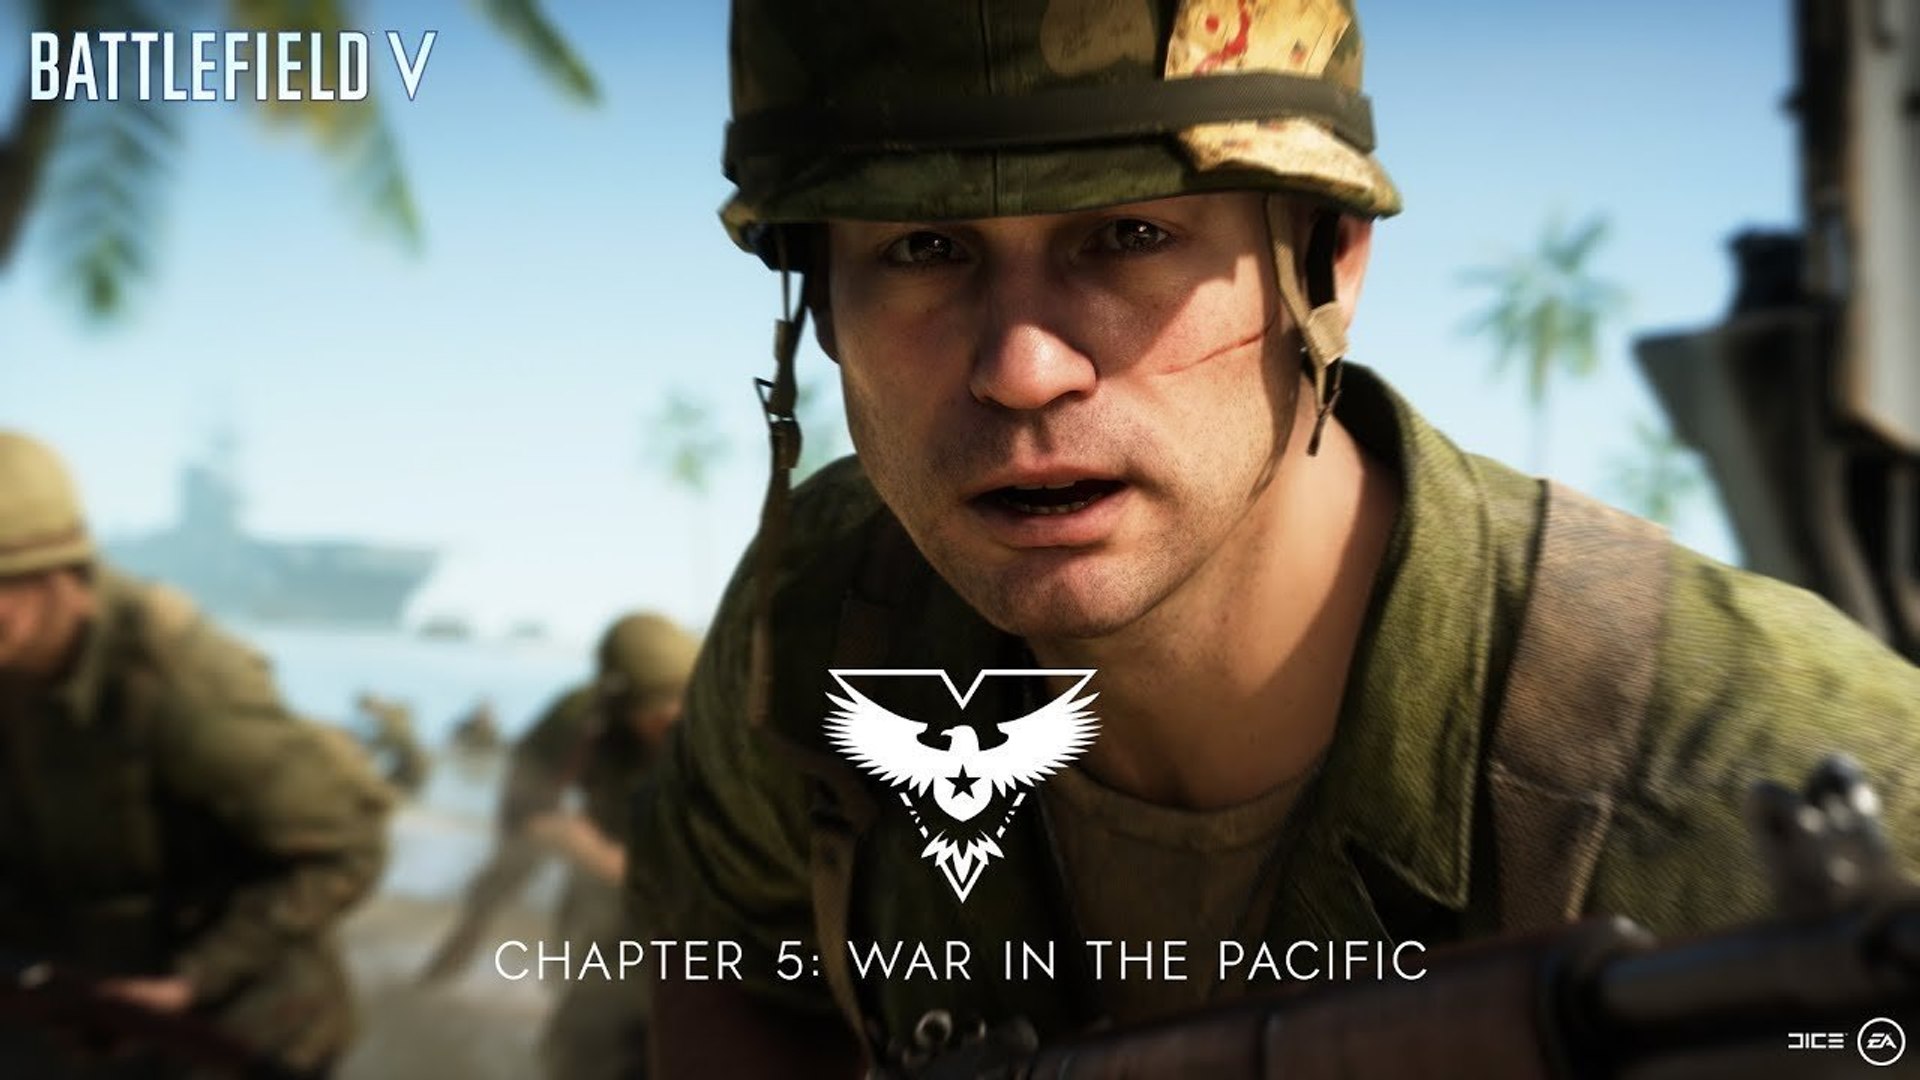 Battlefield V - War in the Pacific Official Trailer | Xbox Game (2019) 4K  HD - video Dailymotion